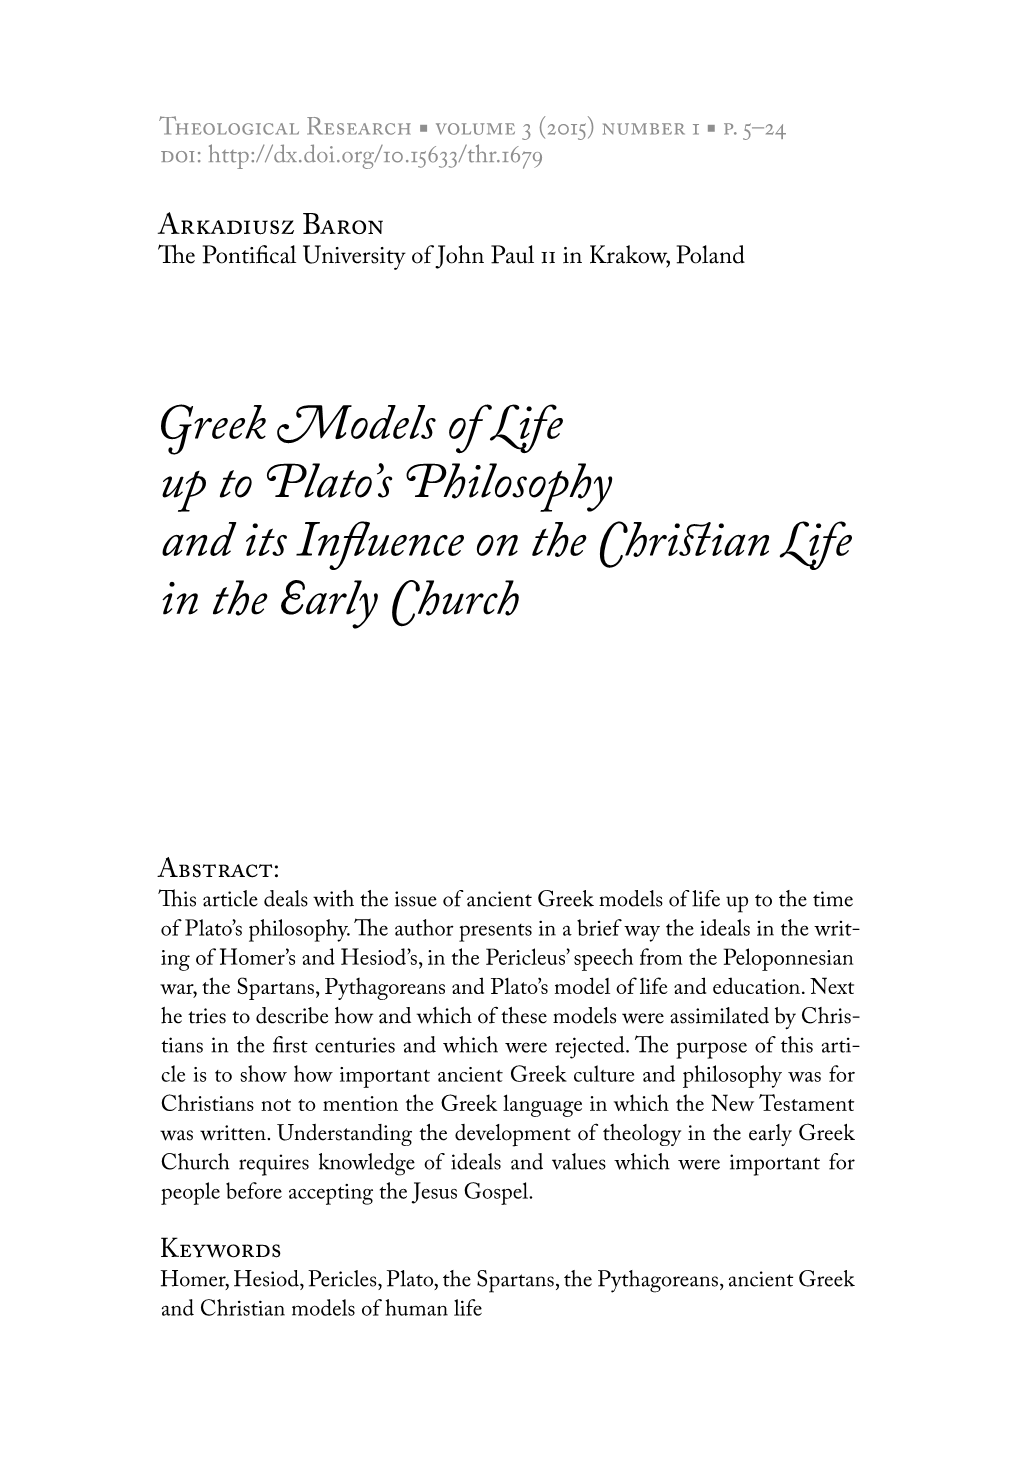 Greek Models of Life up to Plato's Philosophy and Its